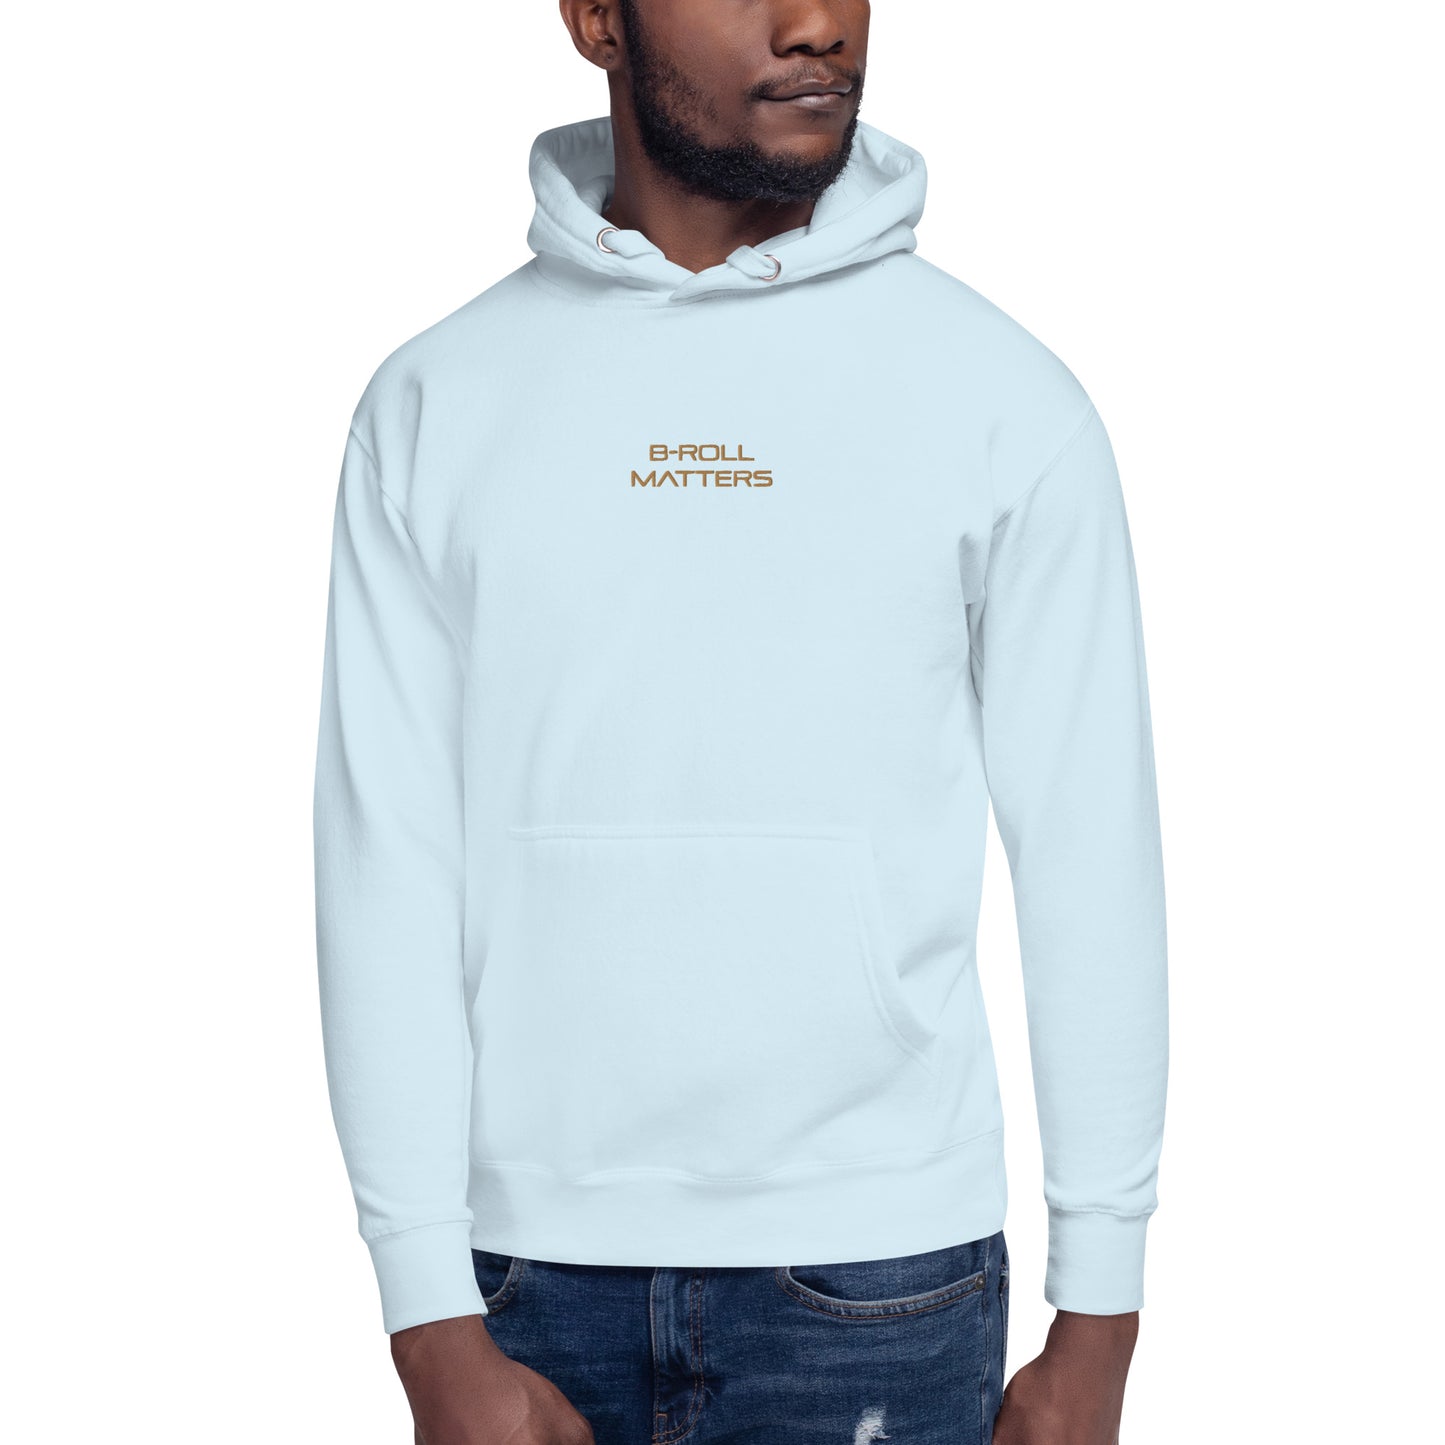 BRoll Matters Embroidery Unisex Hoodie